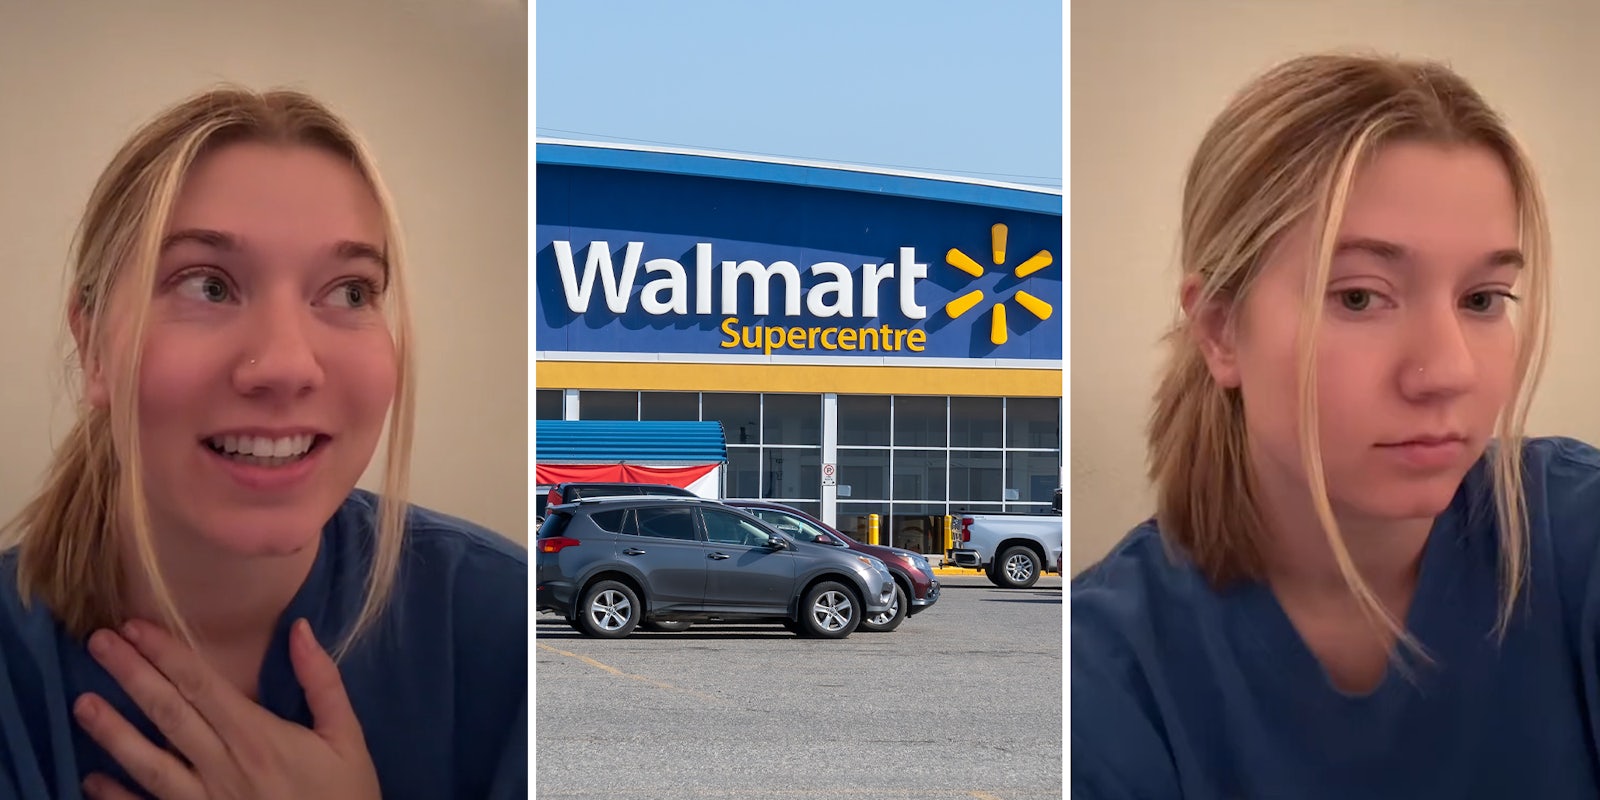 Walmart manager from store 2 time zones away reports Walmart worker for social media activity